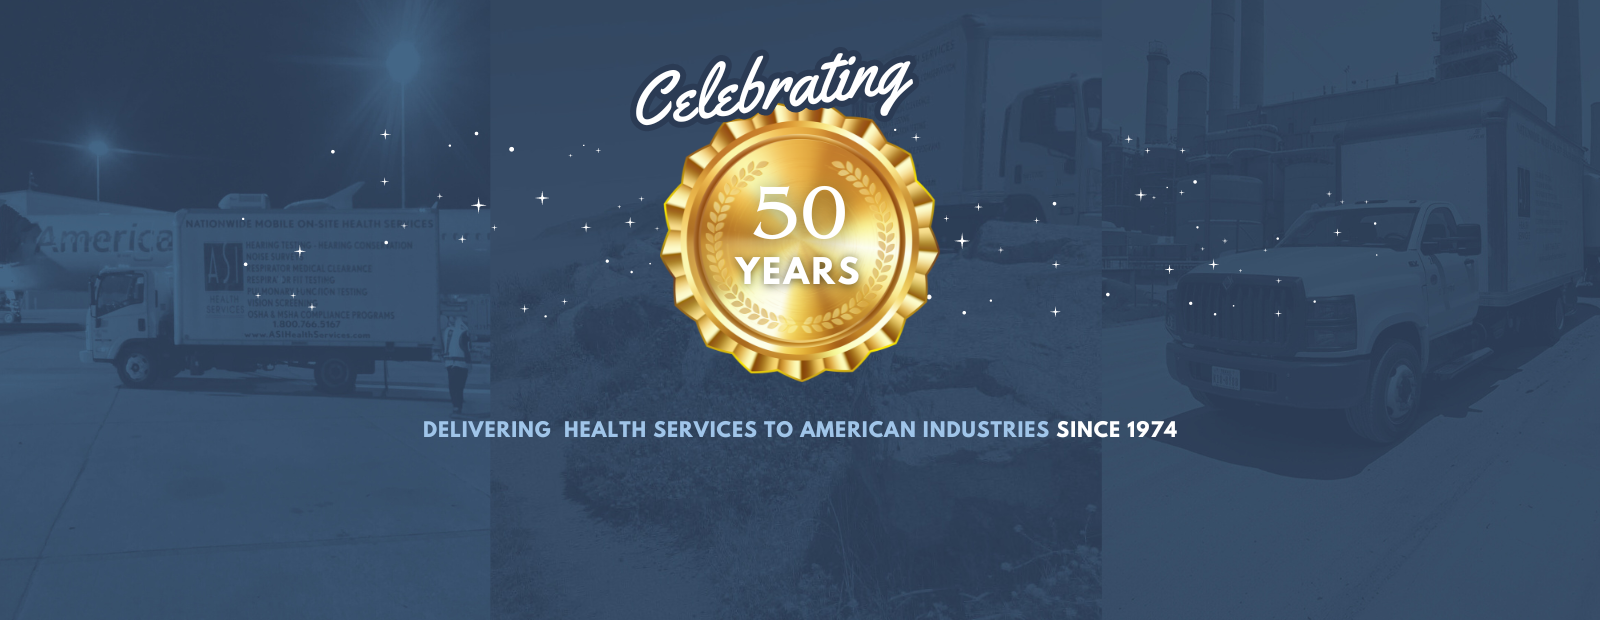 Celebrating 50 Years of Health Services / Since 1974